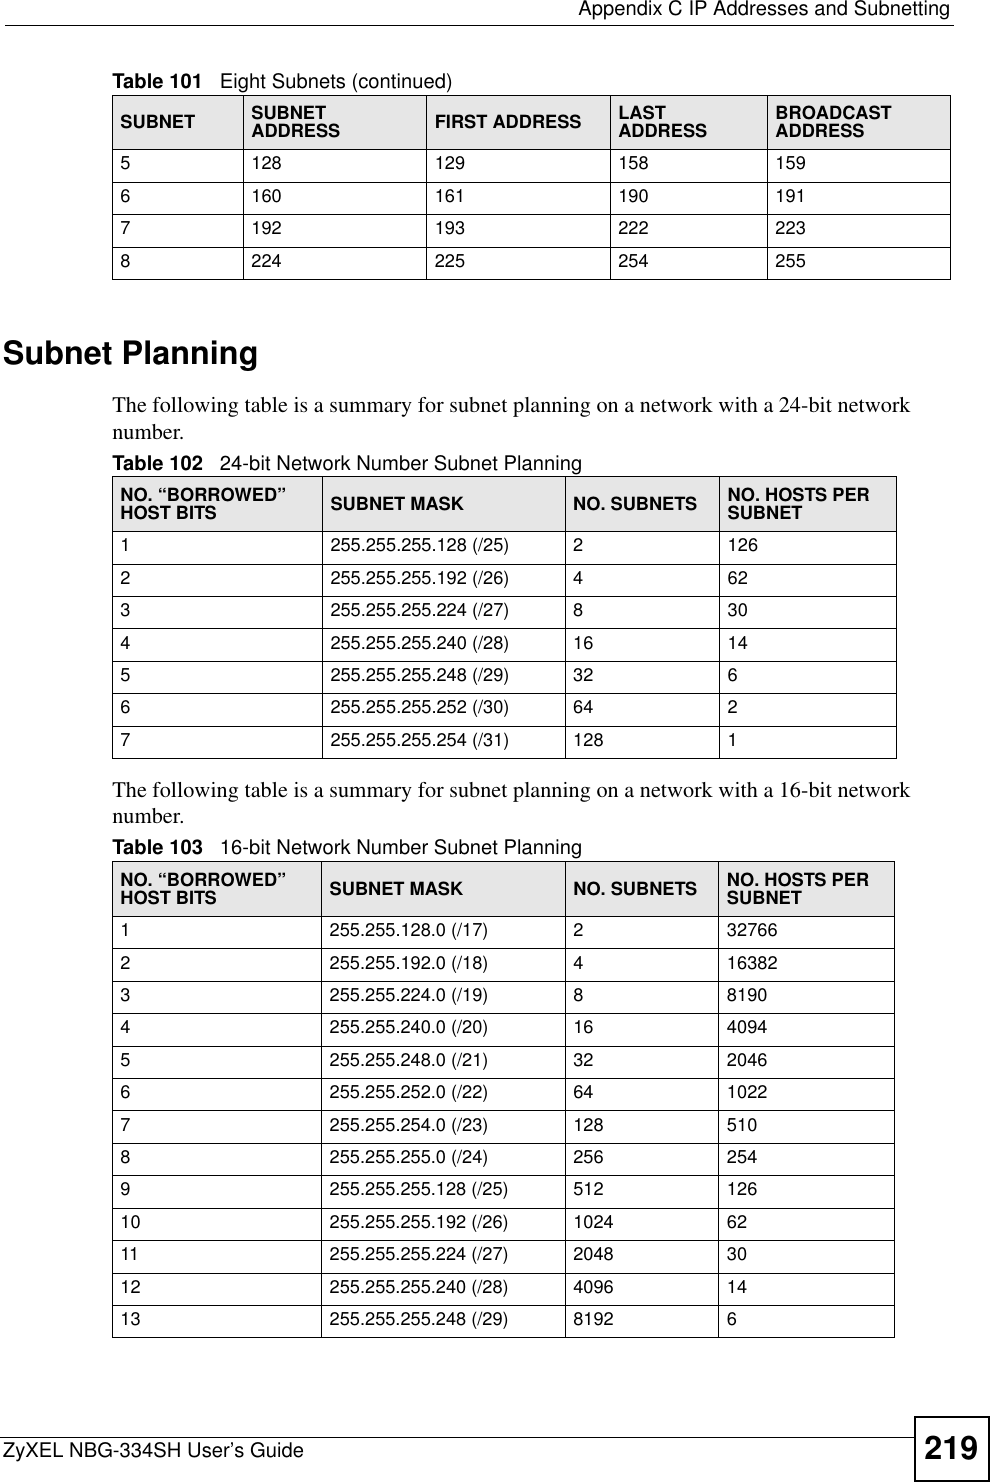  Appendix C IP Addresses and SubnettingZyXEL NBG-334SH User’s Guide 219Subnet PlanningThe following table is a summary for subnet planning on a network with a 24-bit network number.The following table is a summary for subnet planning on a network with a 16-bit network number. 5128 129 158 1596160 161 190 1917192 193 222 2238224 225 254 255Table 101   Eight Subnets (continued)SUBNET SUBNETADDRESS FIRST ADDRESS LAST ADDRESS BROADCAST ADDRESSTable 102   24-bit Network Number Subnet PlanningNO. “BORROWED” HOST BITS SUBNET MASK NO. SUBNETS NO. HOSTS PER SUBNET1255.255.255.128 (/25) 21262255.255.255.192 (/26) 4623255.255.255.224 (/27) 8304255.255.255.240 (/28) 16 145255.255.255.248 (/29) 32 66255.255.255.252 (/30) 64 27255.255.255.254 (/31) 128 1Table 103   16-bit Network Number Subnet PlanningNO. “BORROWED” HOST BITS SUBNET MASK NO. SUBNETS NO. HOSTS PER SUBNET1255.255.128.0 (/17) 2327662255.255.192.0 (/18) 4163823255.255.224.0 (/19) 881904255.255.240.0 (/20) 16 40945255.255.248.0 (/21) 32 20466255.255.252.0 (/22) 64 10227255.255.254.0 (/23) 128 5108255.255.255.0 (/24) 256 2549255.255.255.128 (/25) 512 12610 255.255.255.192 (/26) 1024 6211 255.255.255.224 (/27) 2048 3012 255.255.255.240 (/28) 4096 1413 255.255.255.248 (/29) 8192 6